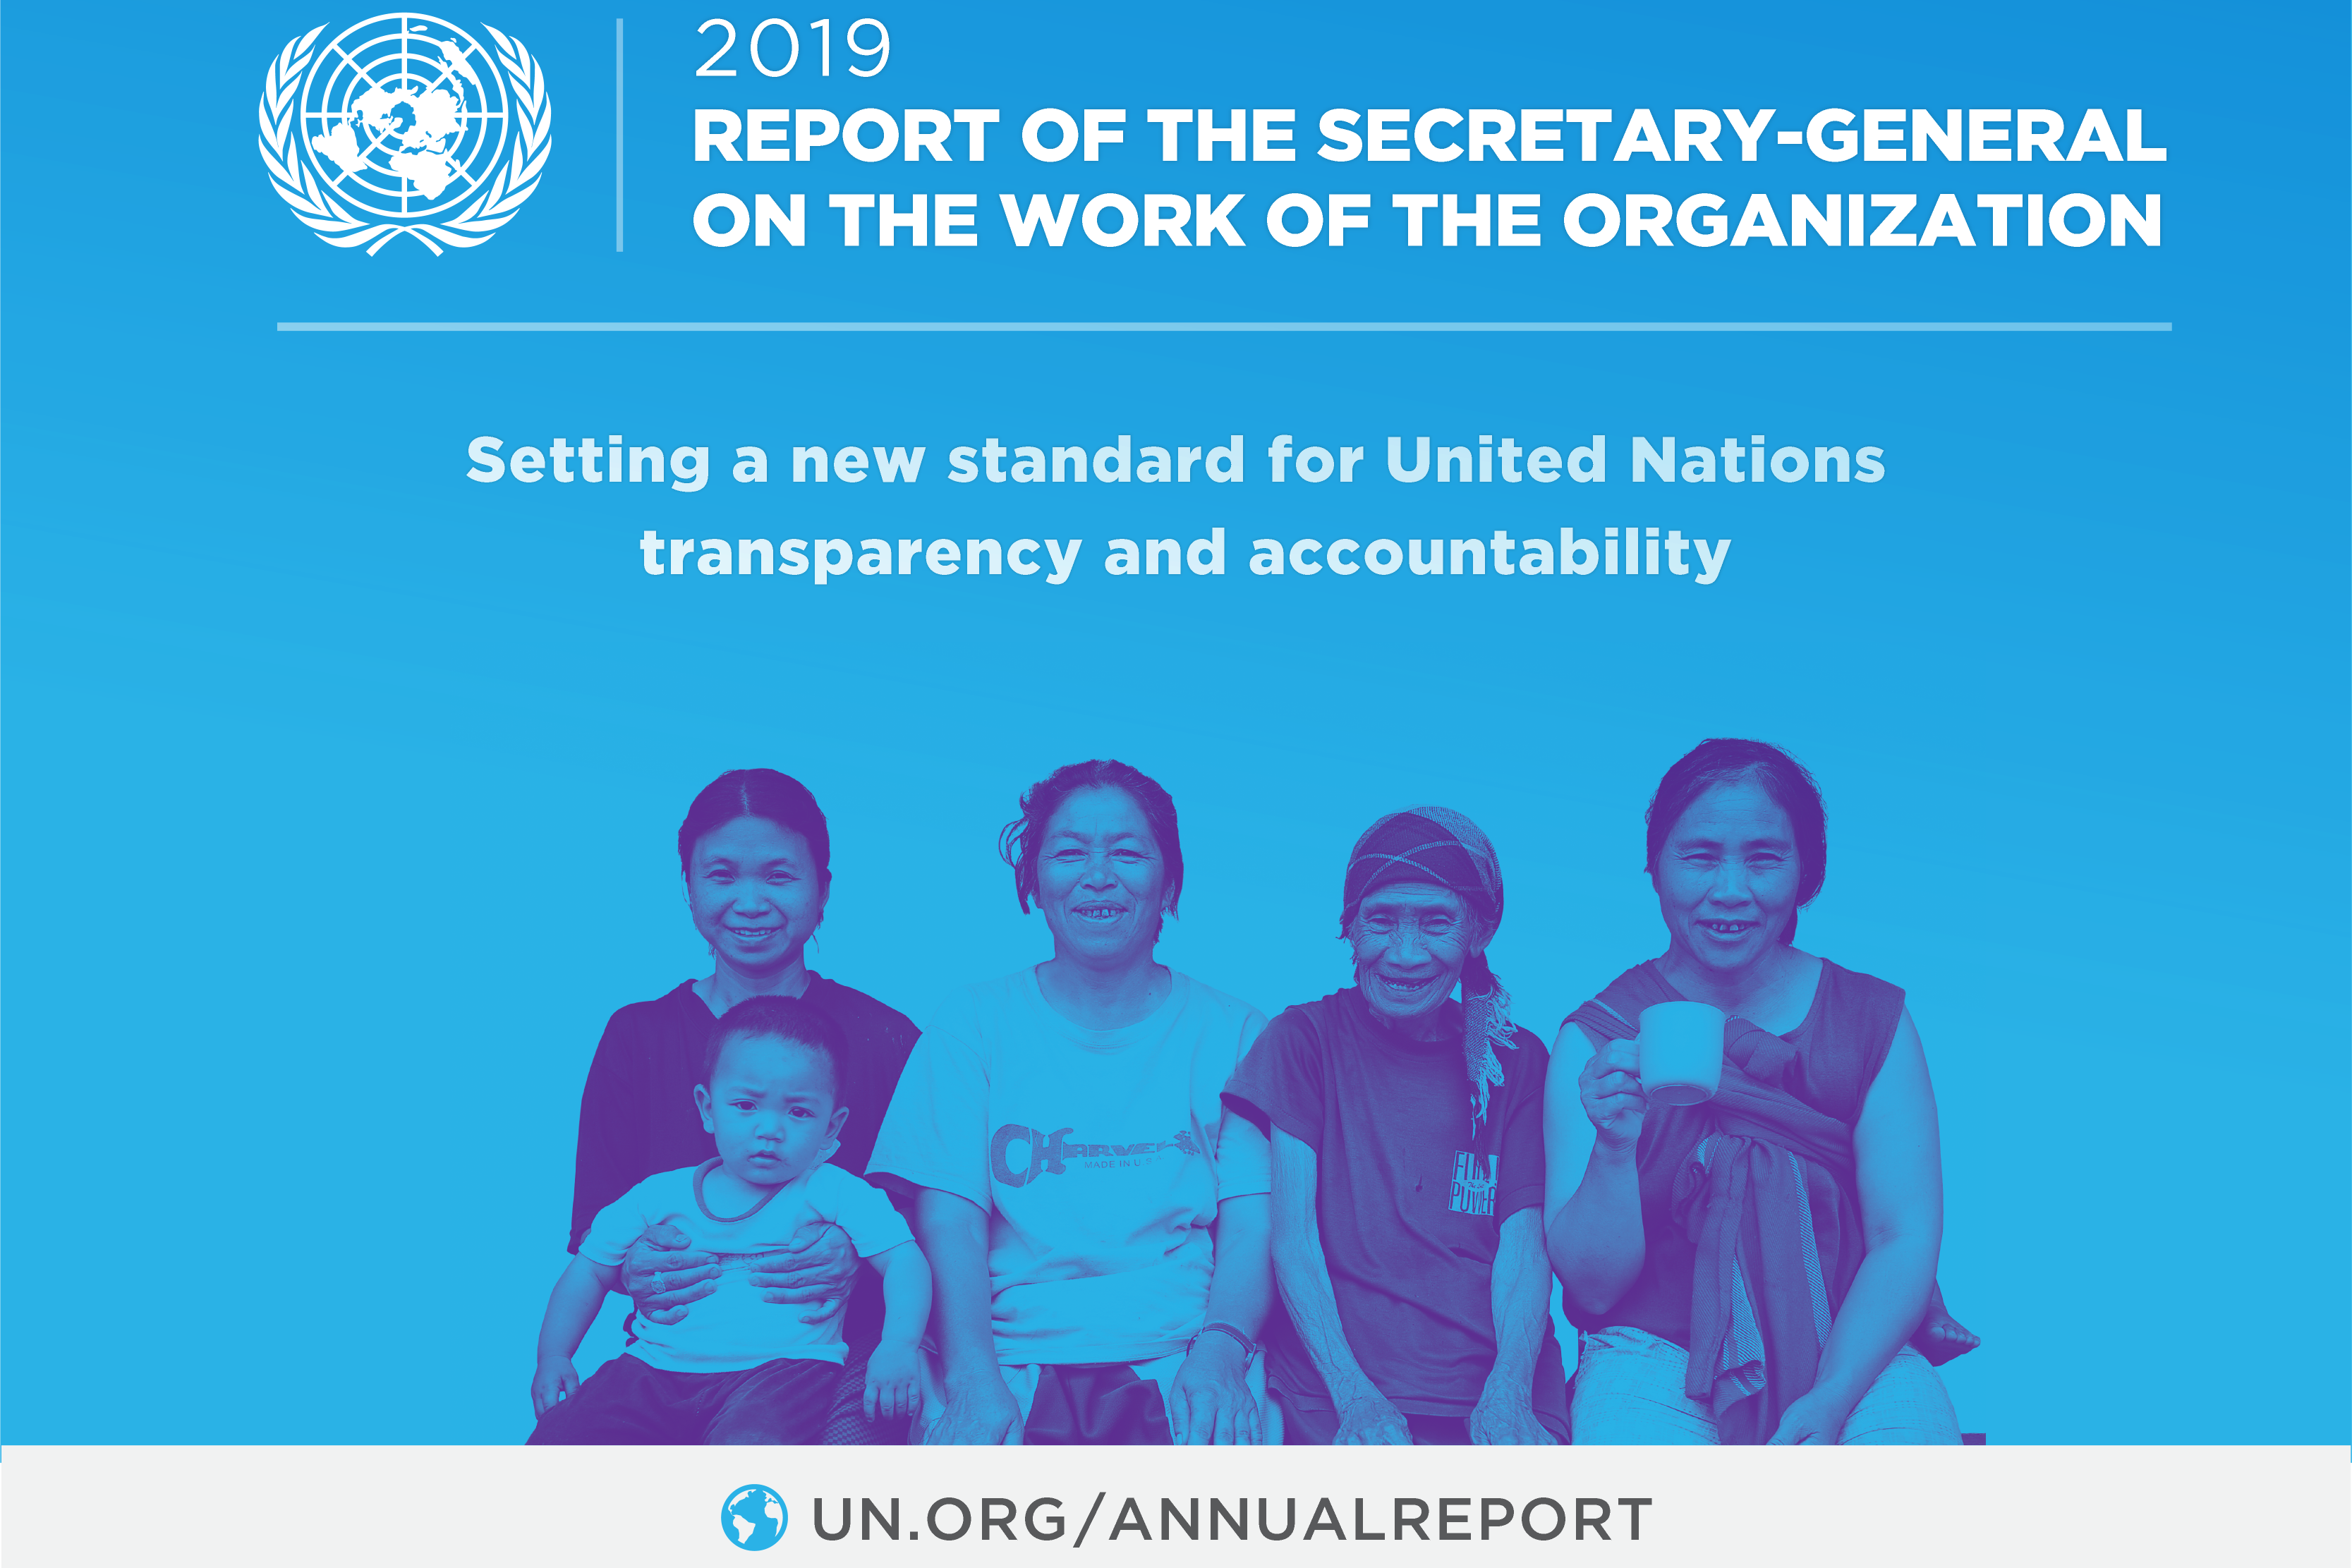 2019 Report of the Secretary-General  on the work of the Organization